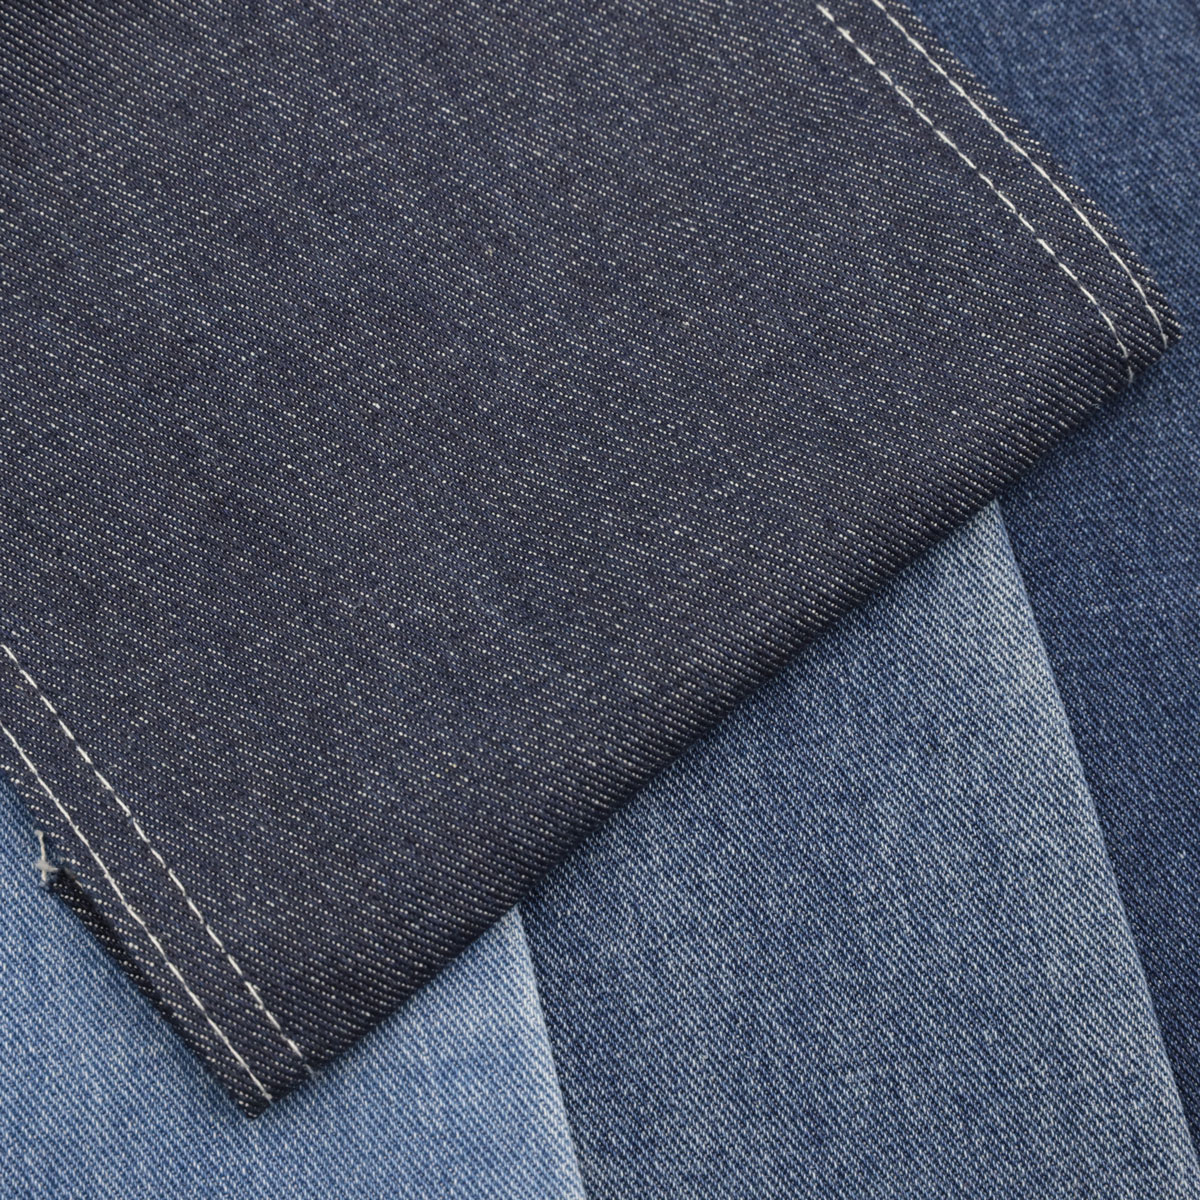 Tips for Choosing the Best Denim Stretch Fabric Supplier 1